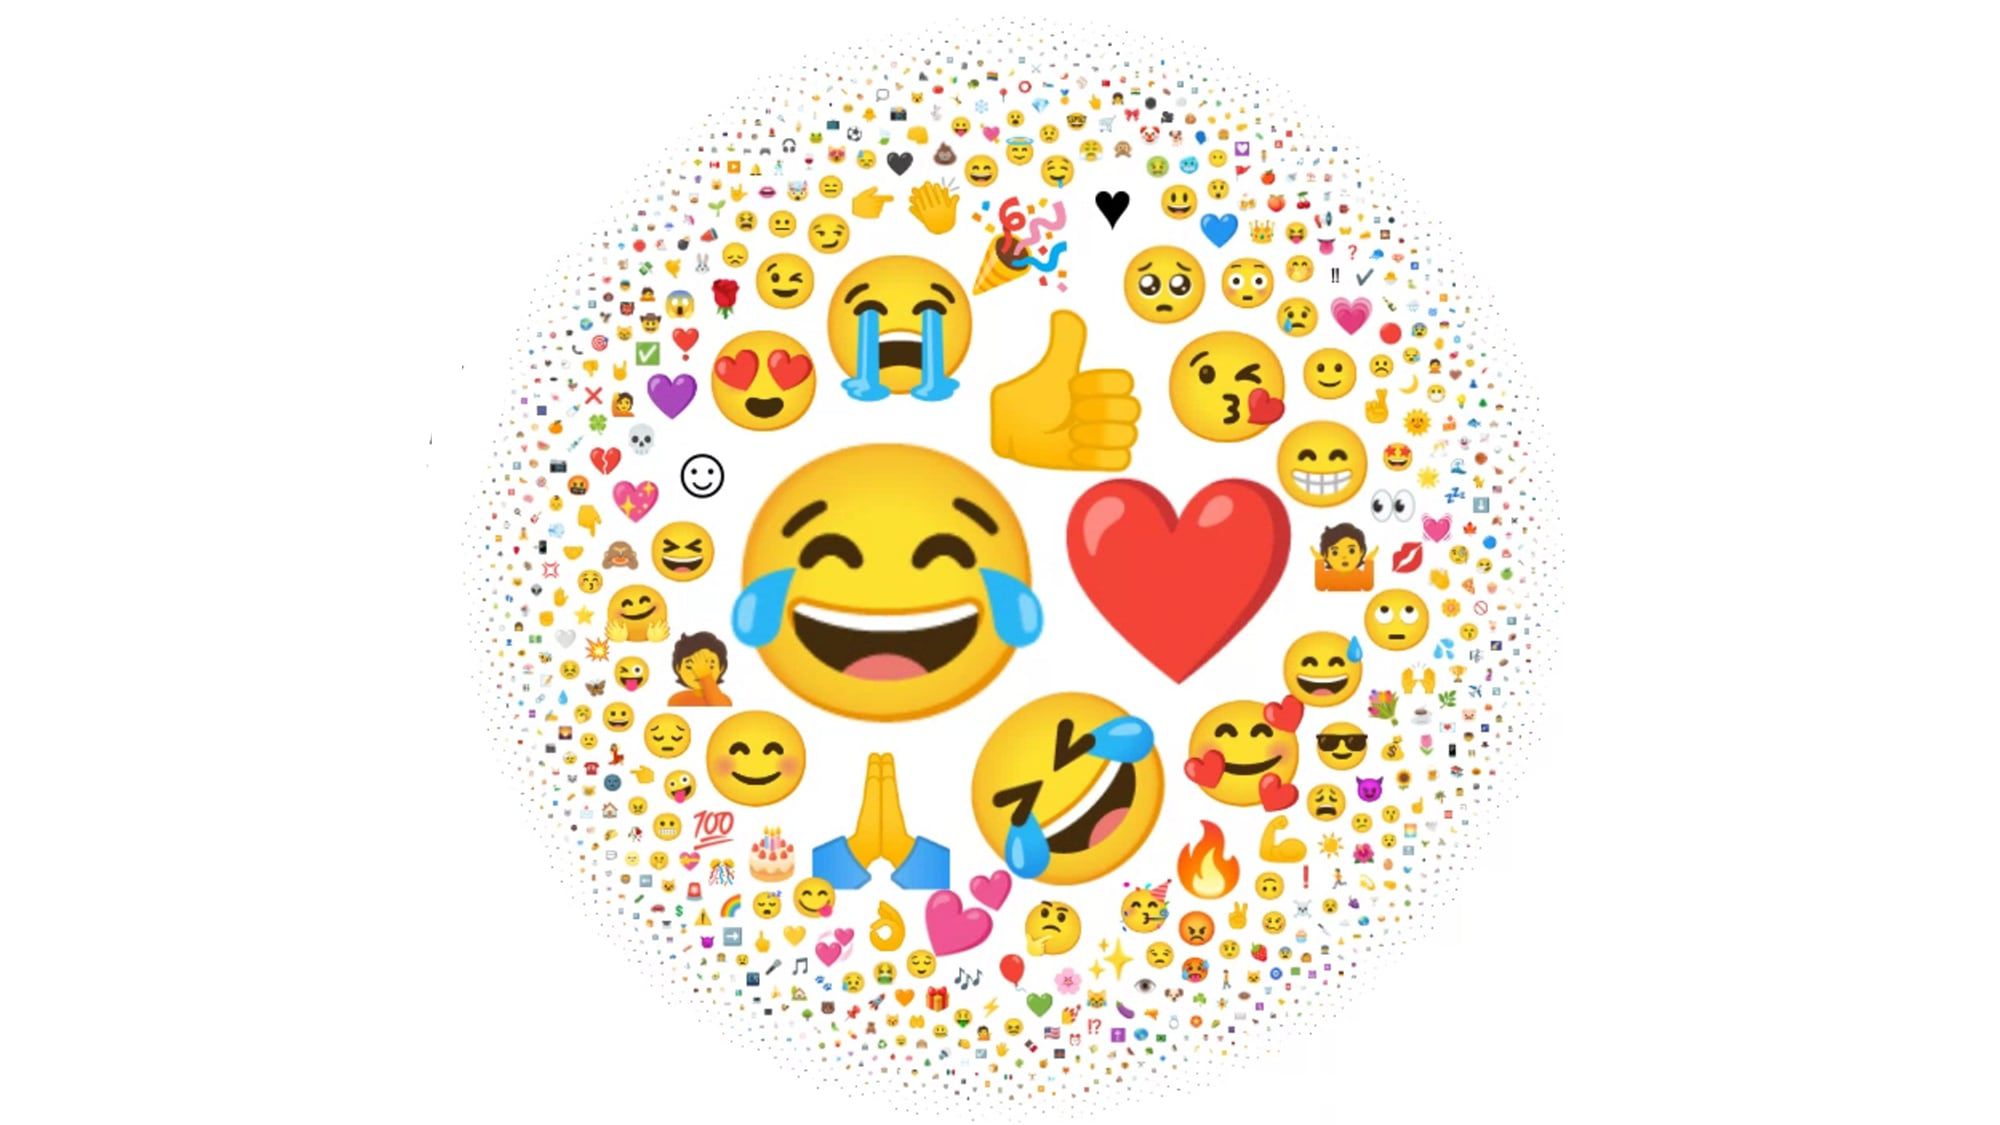 Tears of Joy Remained Most Used Emoji in 2021